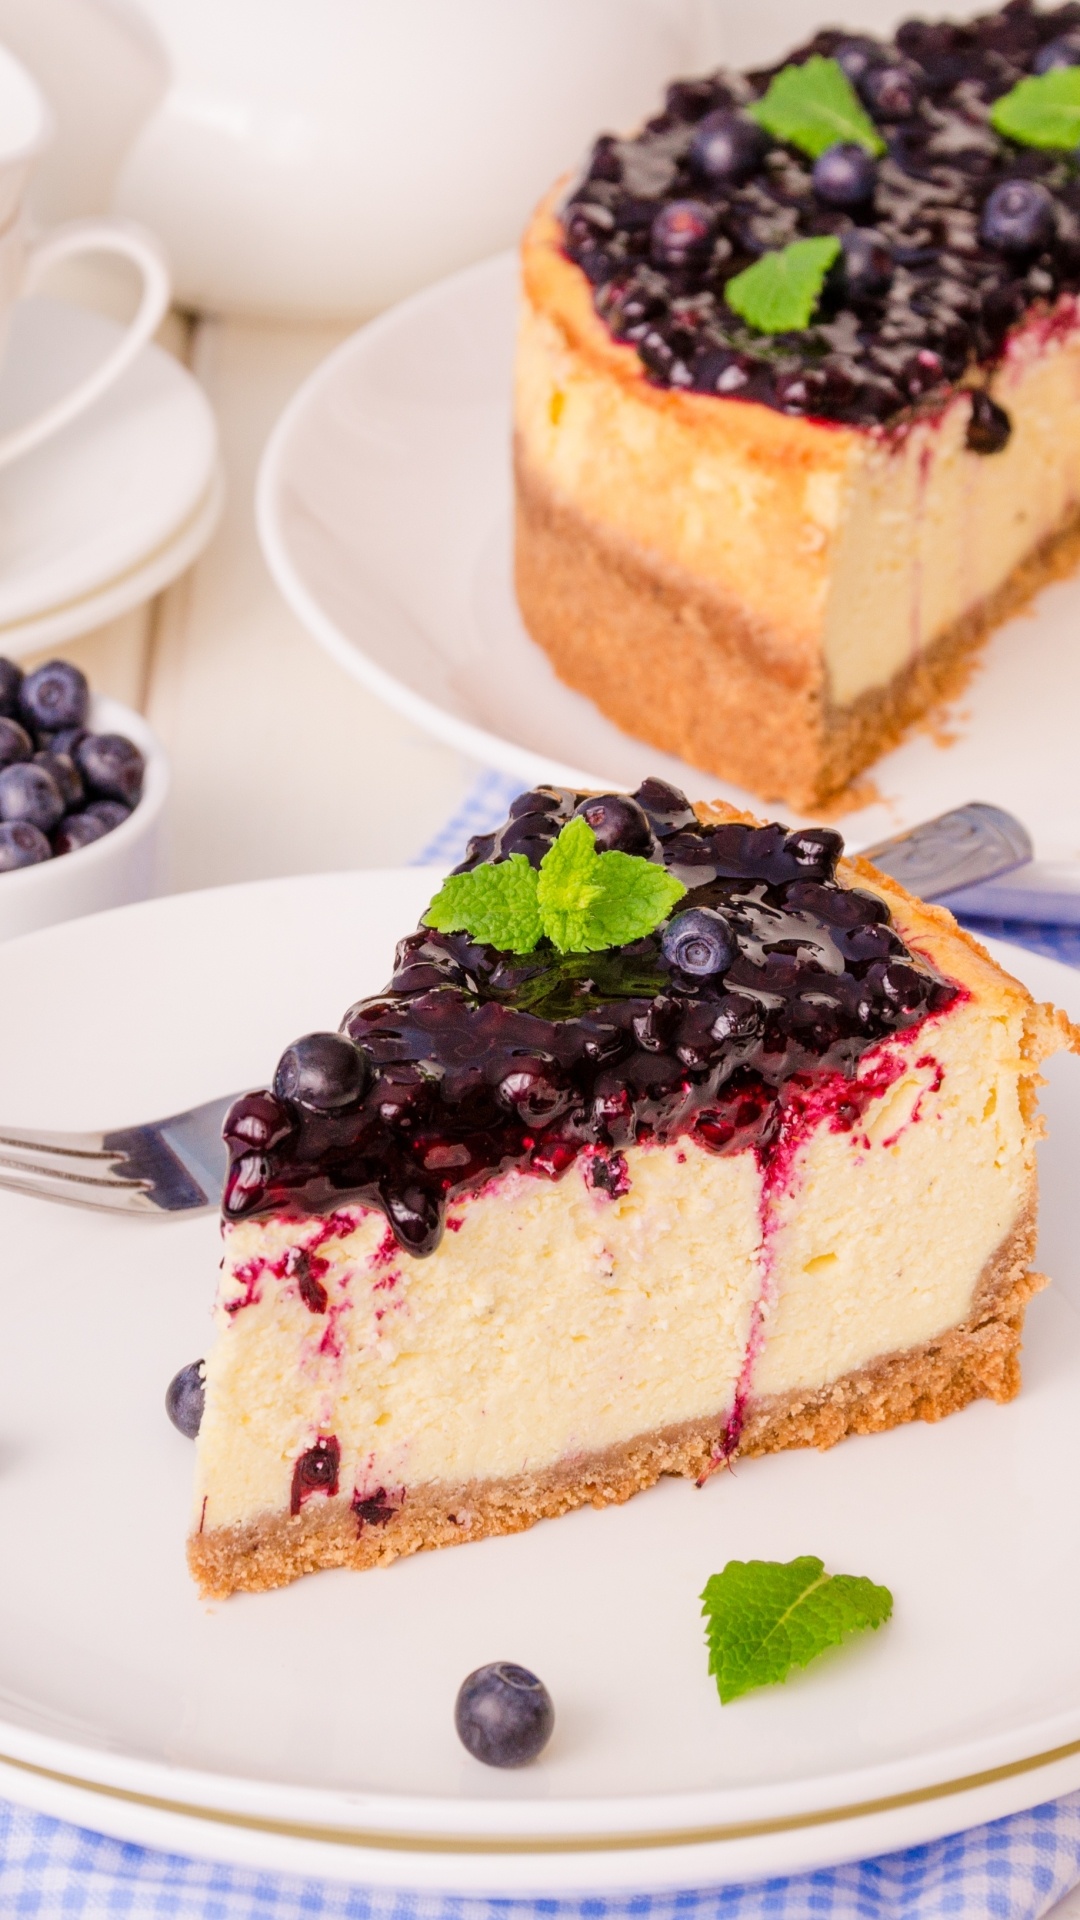 Cheesecake: Uses a cream cheese base, sometimes with the addition of sour cream or heavy cream. 1080x1920 Full HD Background.